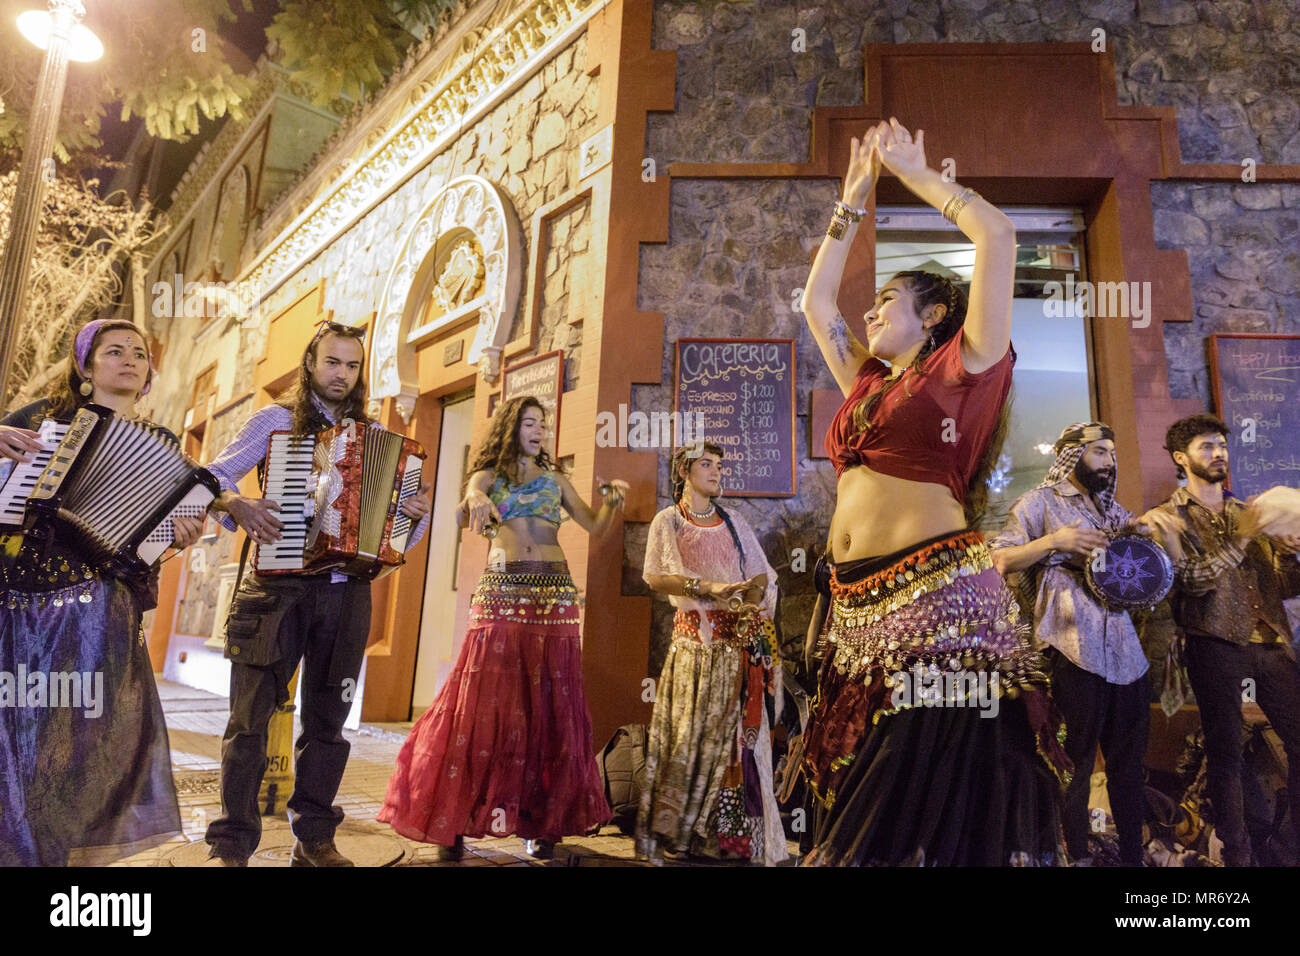 Lastarria, Santiago, Chile: A street band plays and dances to gypsy music. Stock Photo